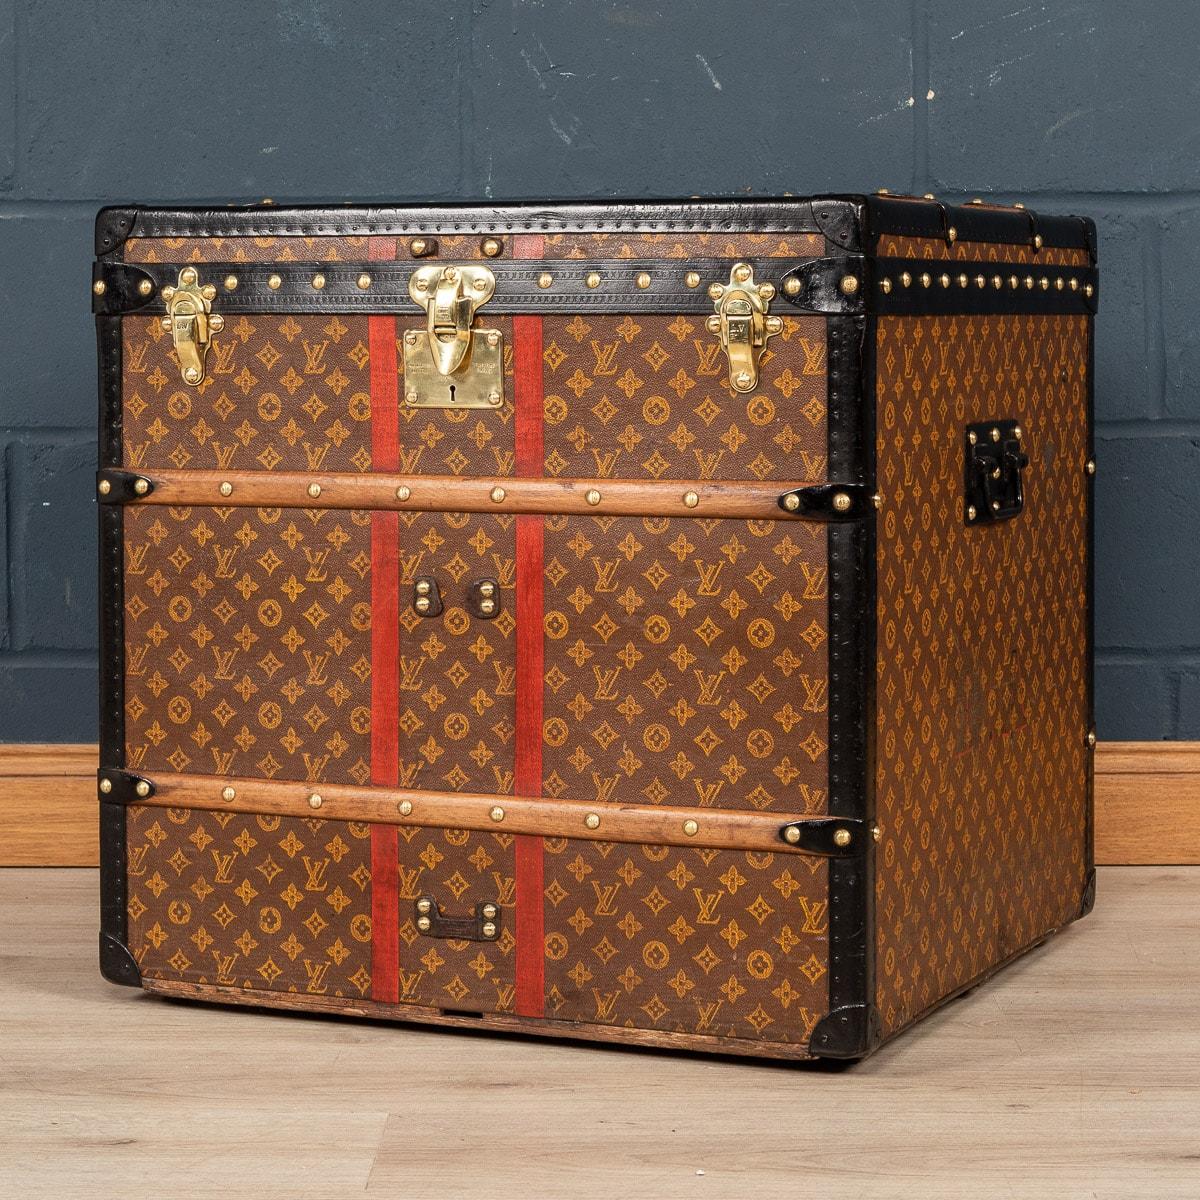 A superb example of an early 20th century Louis Vuitton hat trunk in the world famous monogrammed LV canvas. Complete with all its interior trays, this unusually sized trunk is in very good condition and harks back to times of passenger ships and